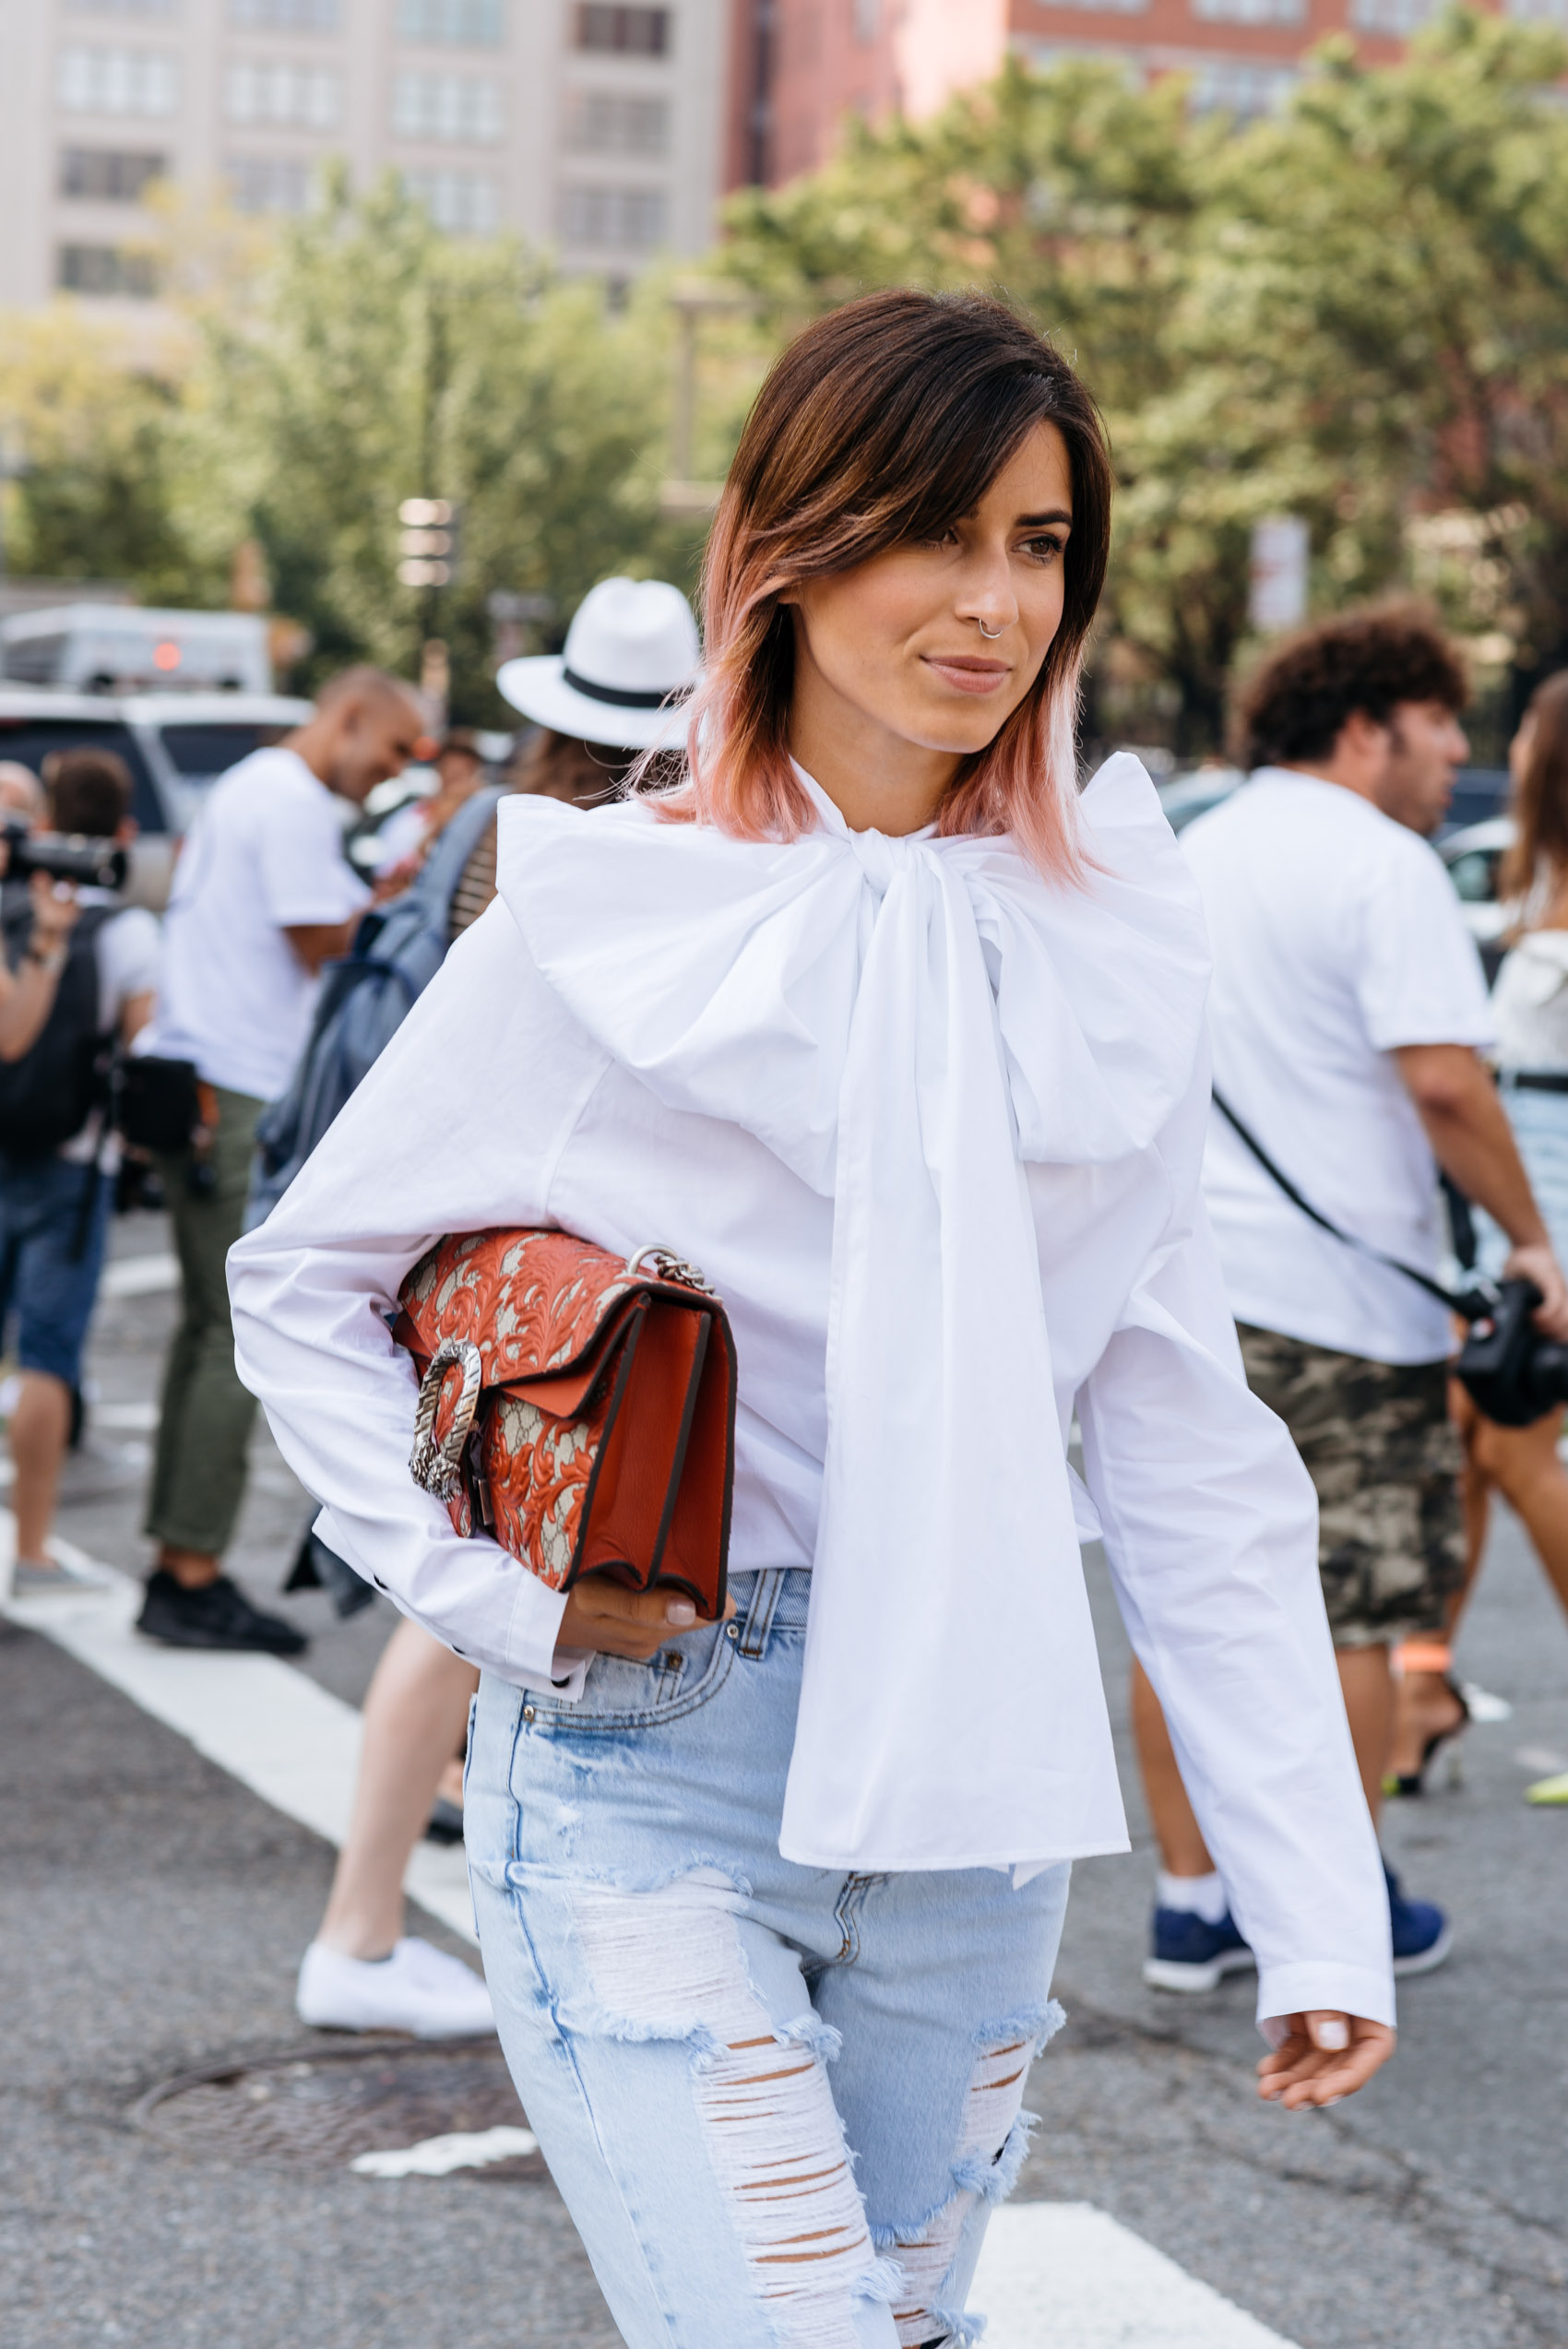 Ombré pink hair, statement bow, vintage denim and Gucci dionysus bag street style at NYFW